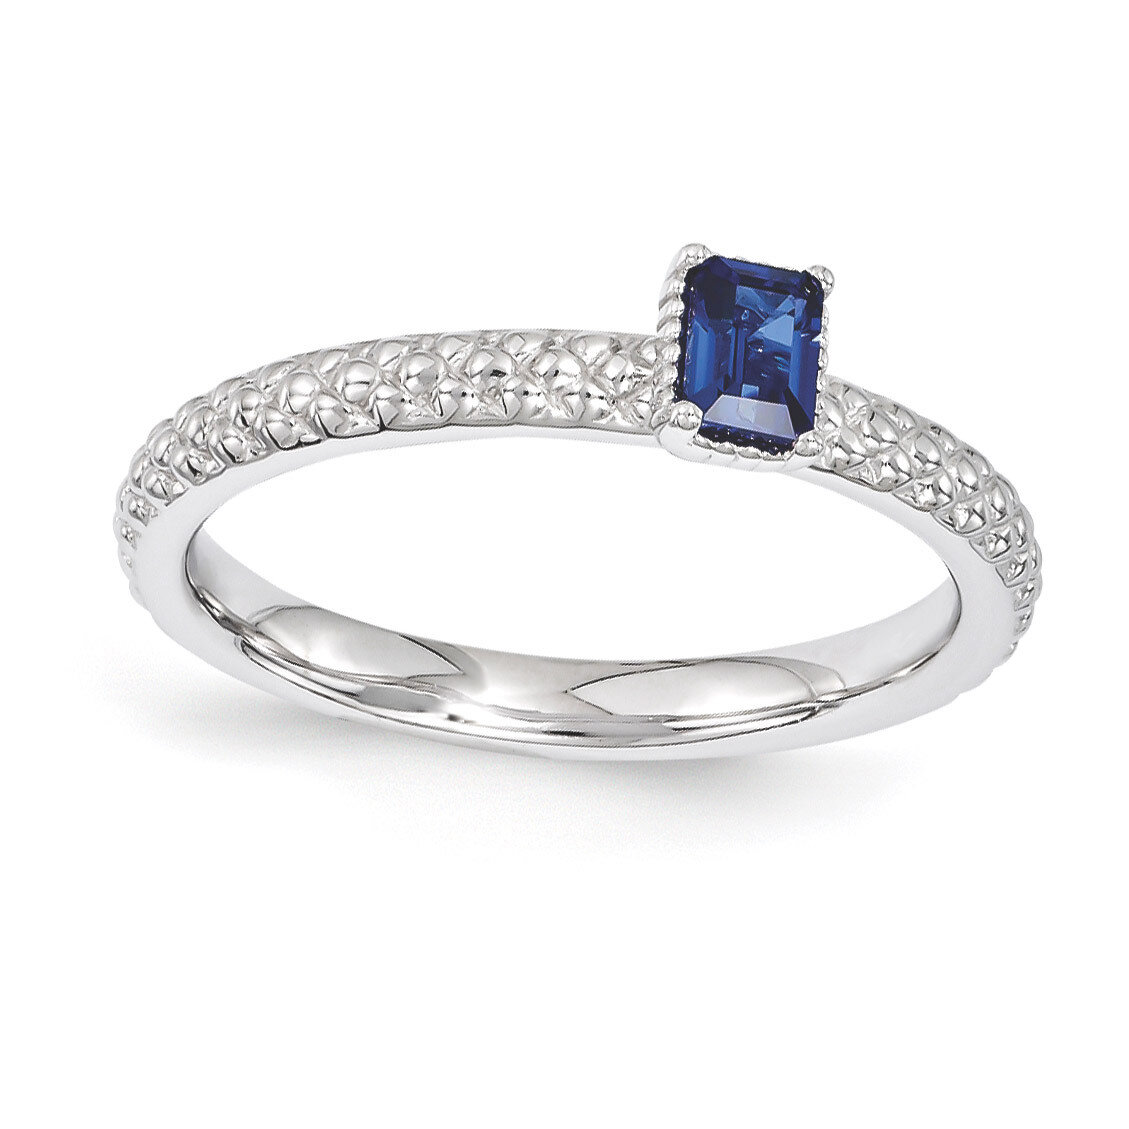 Sapphire Single Stone Ring - Sterling Silver QSK1581